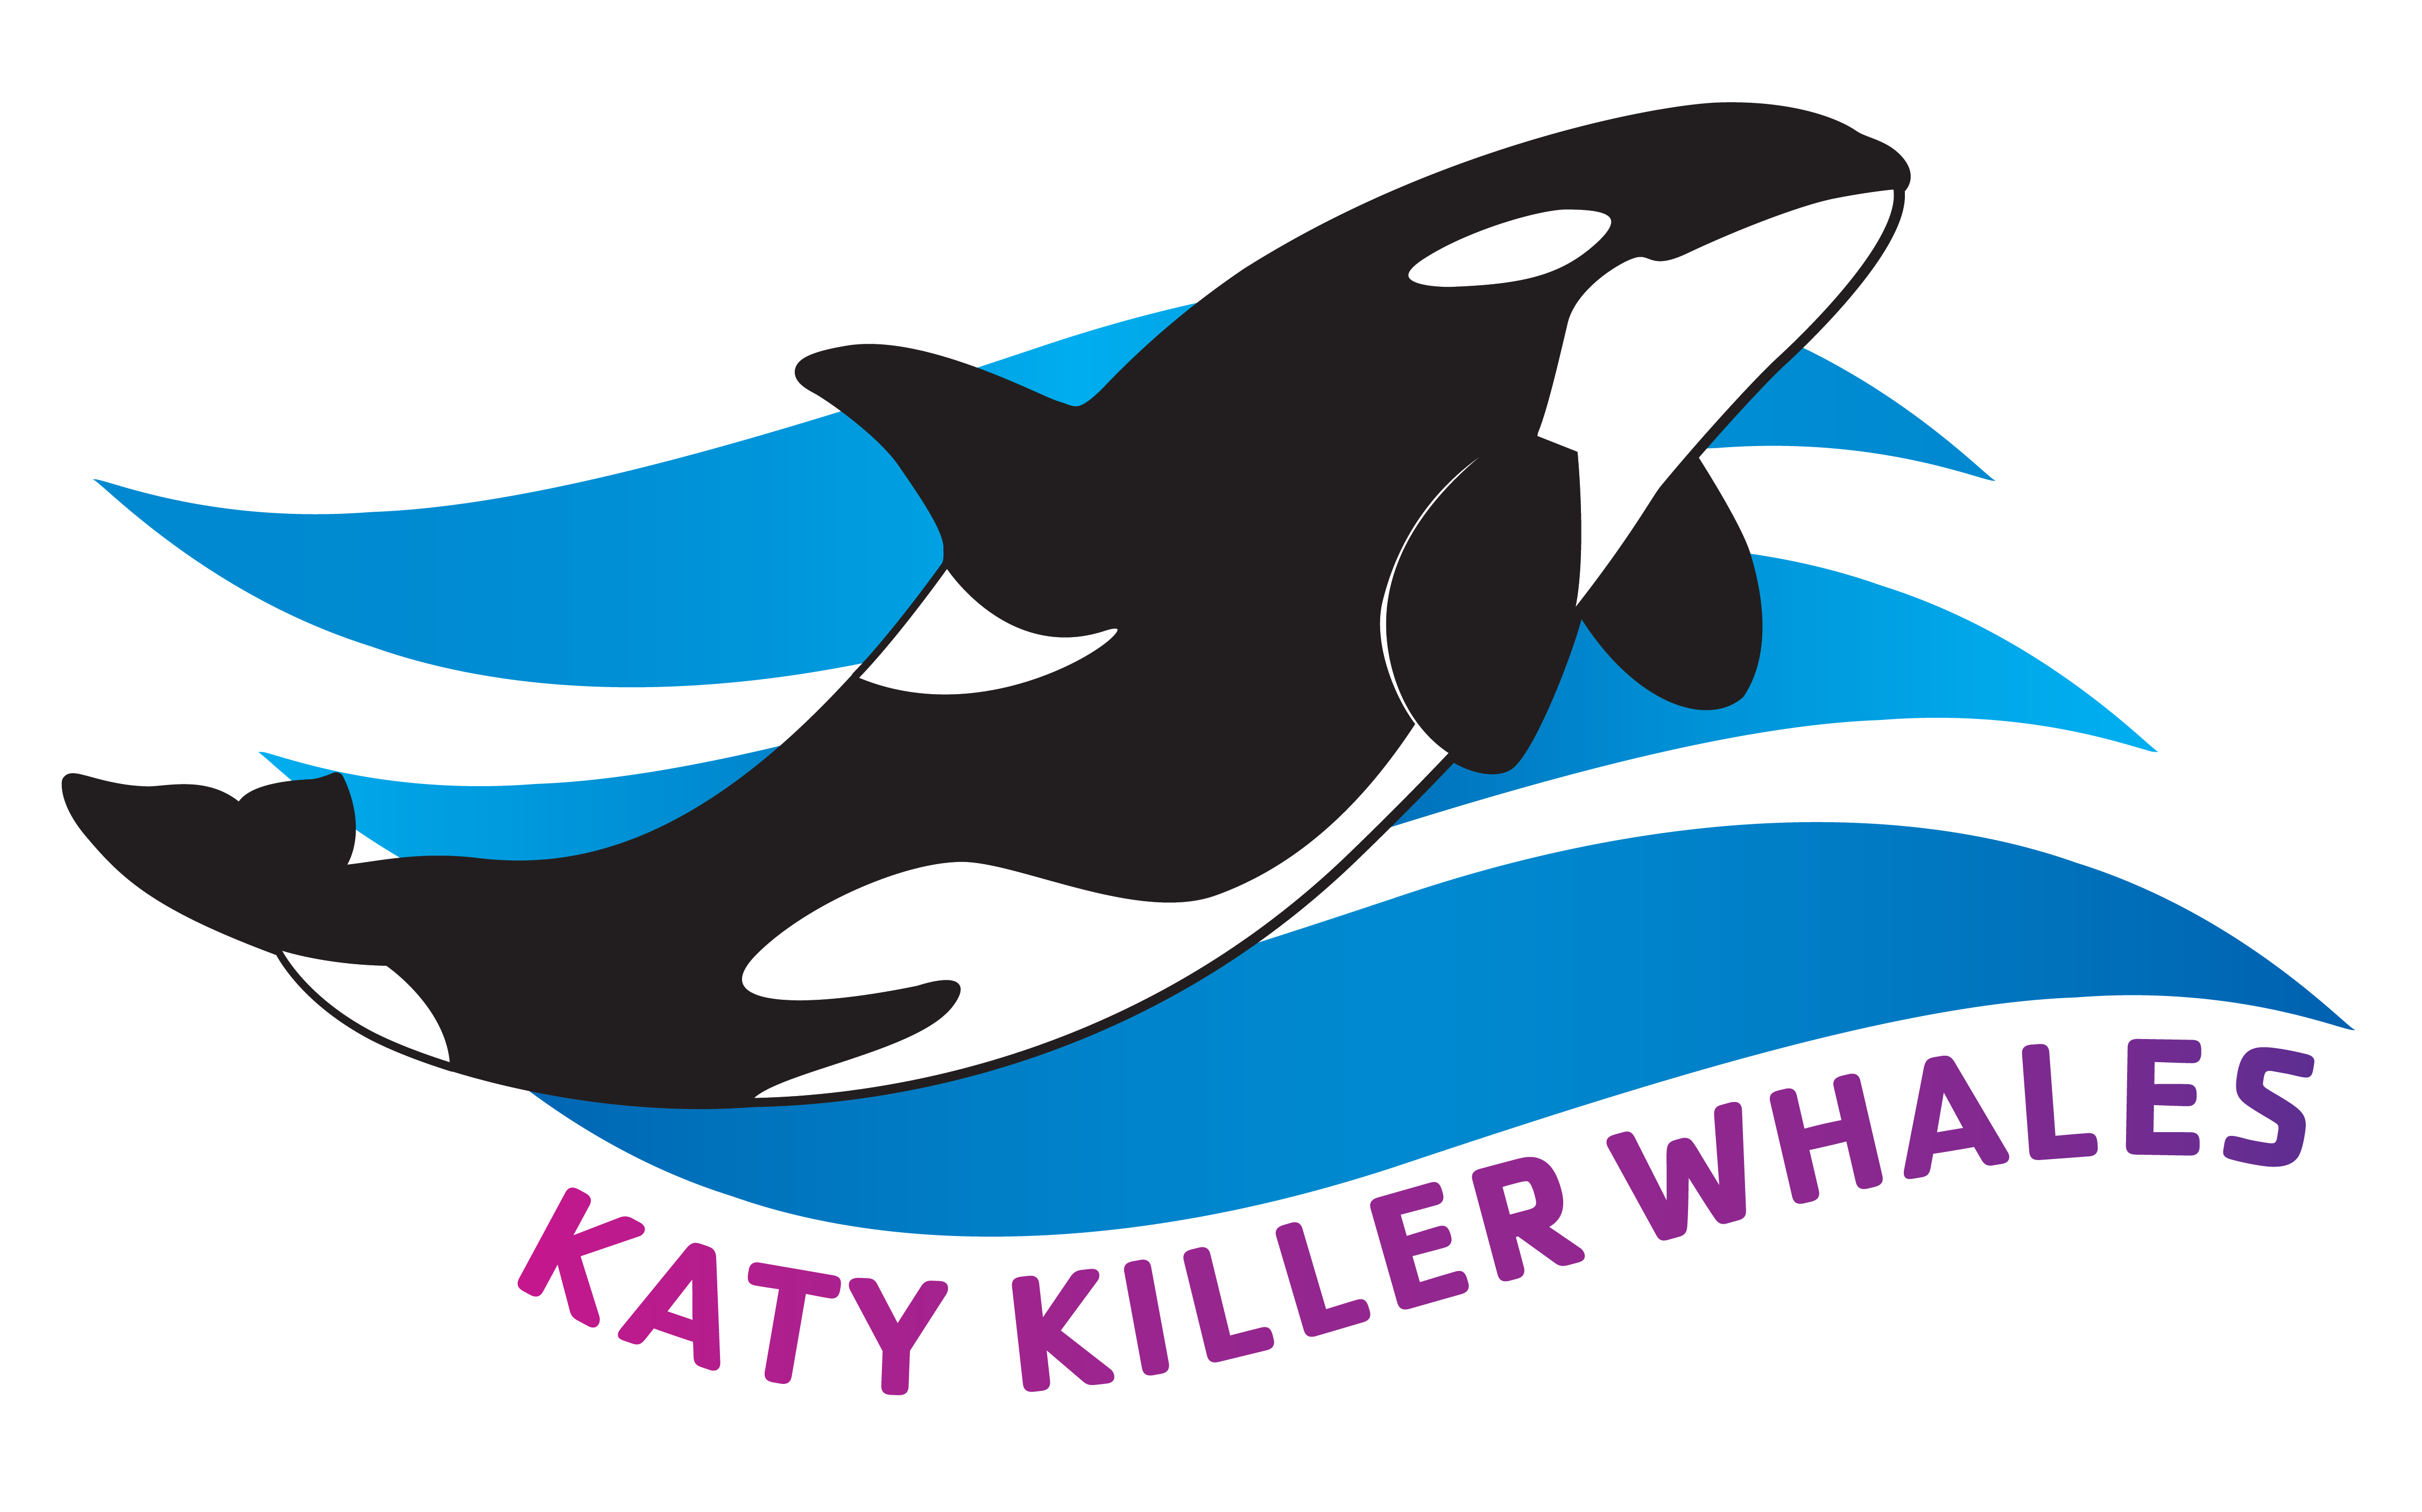 A logo of a black and white killer whale jumping over blue waves with the text “Katy Killer Whales” in pink below.